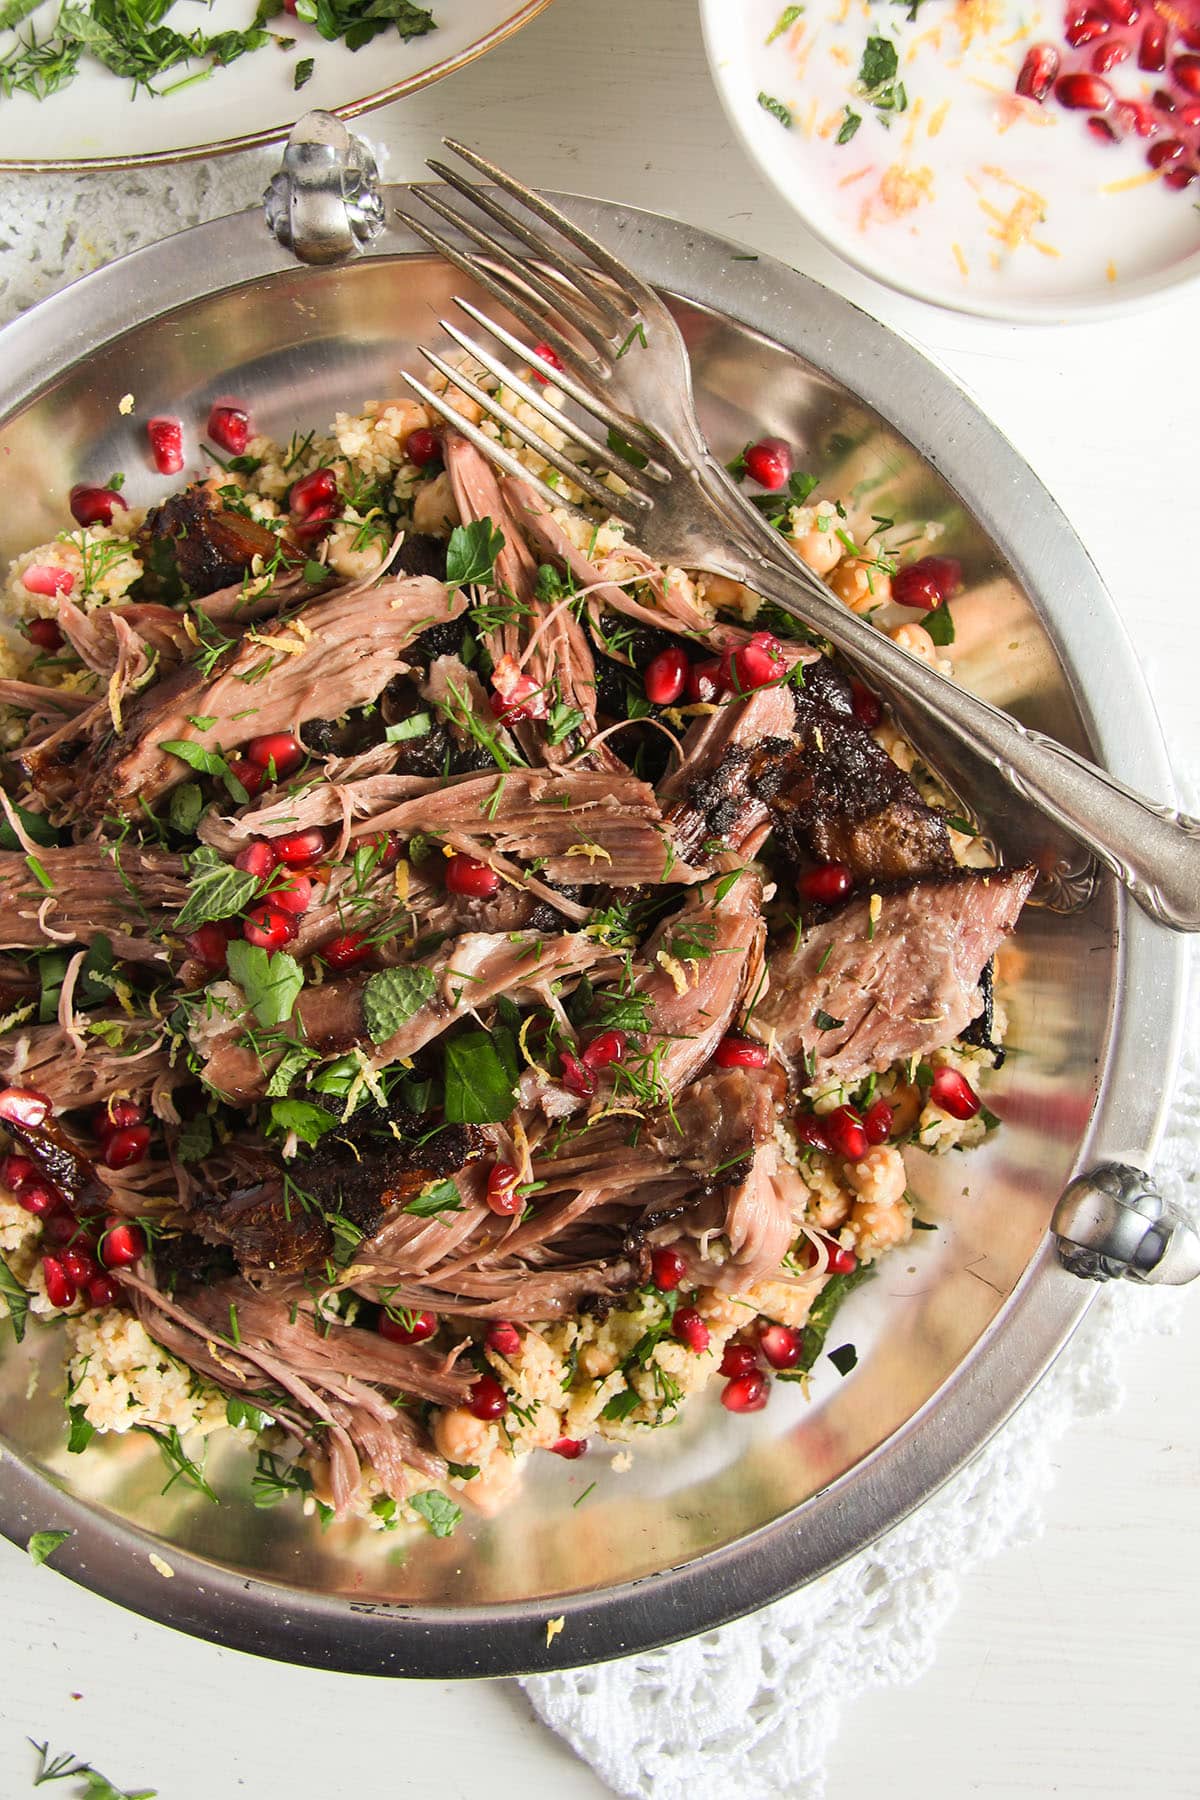 shredded pomegranate lamb and two forks on a large plate.